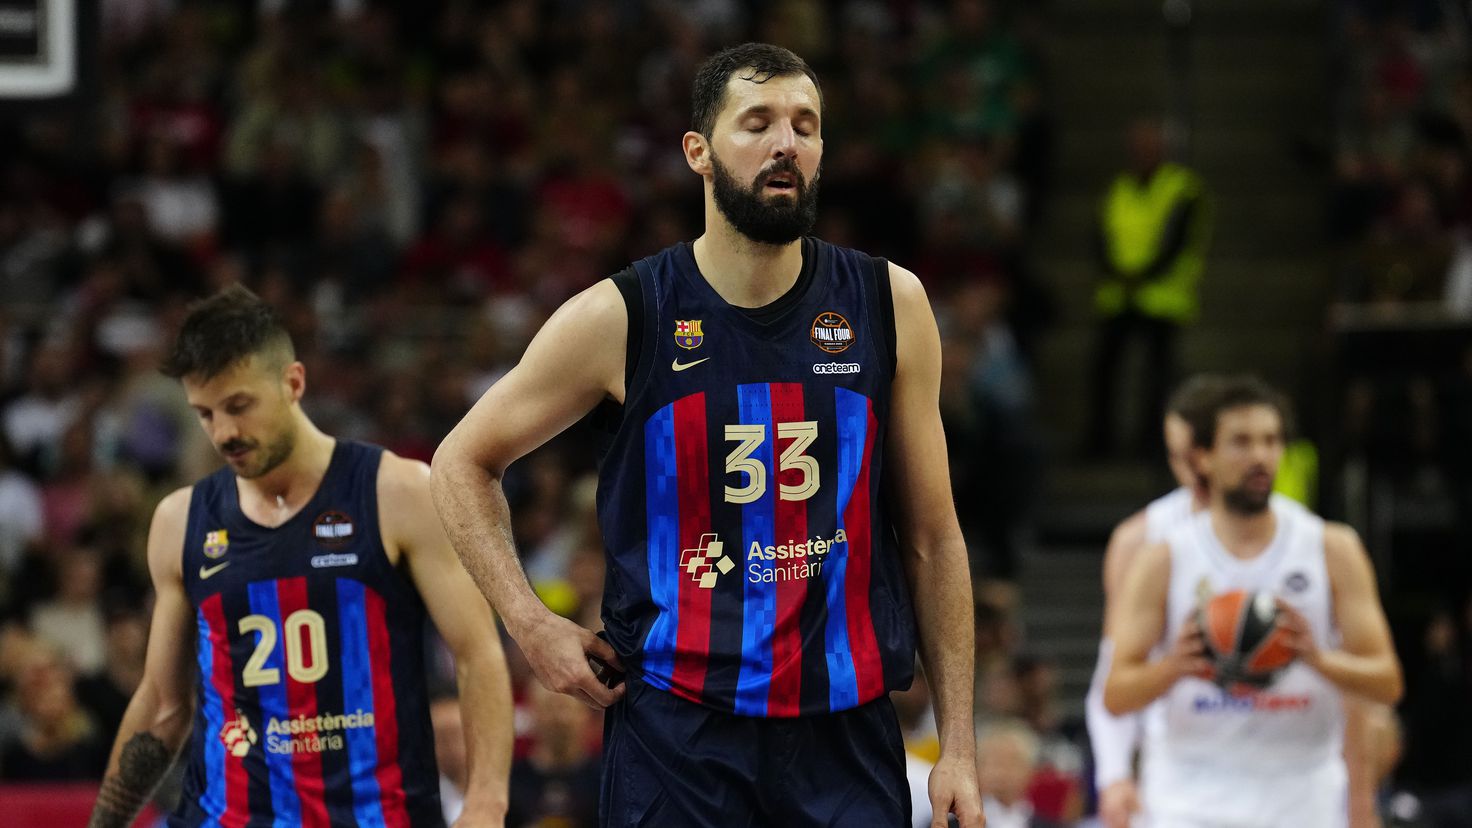 The hardest day for Mirotic
